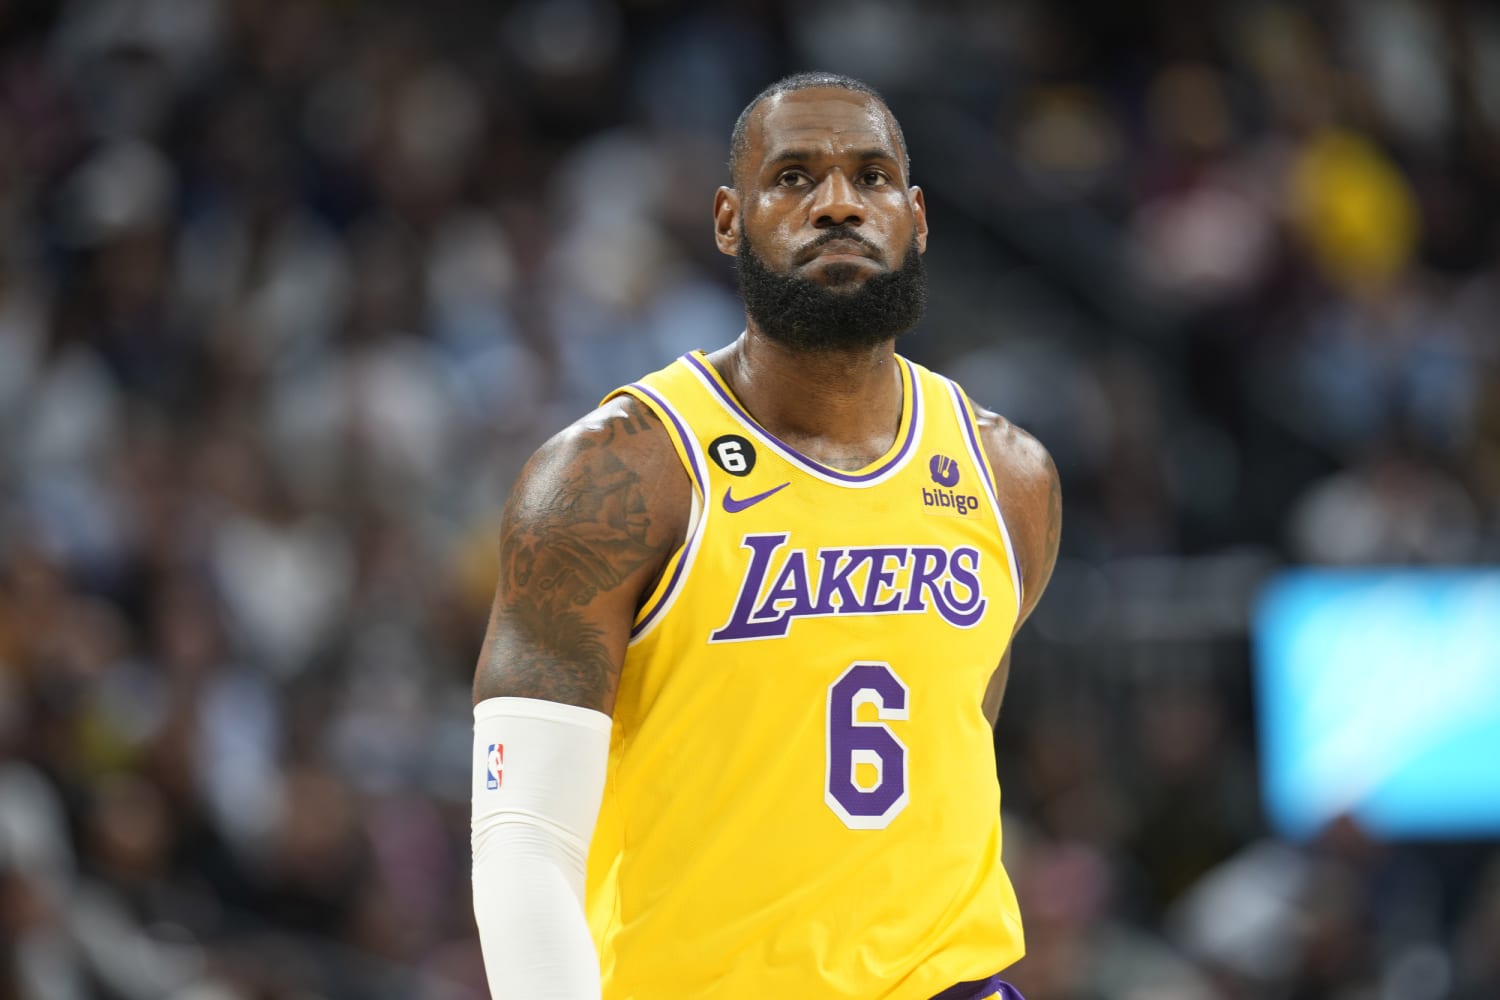 NBA Twitter reacts to LeBron's 48-point night on MLK Day: 'He is still HIM